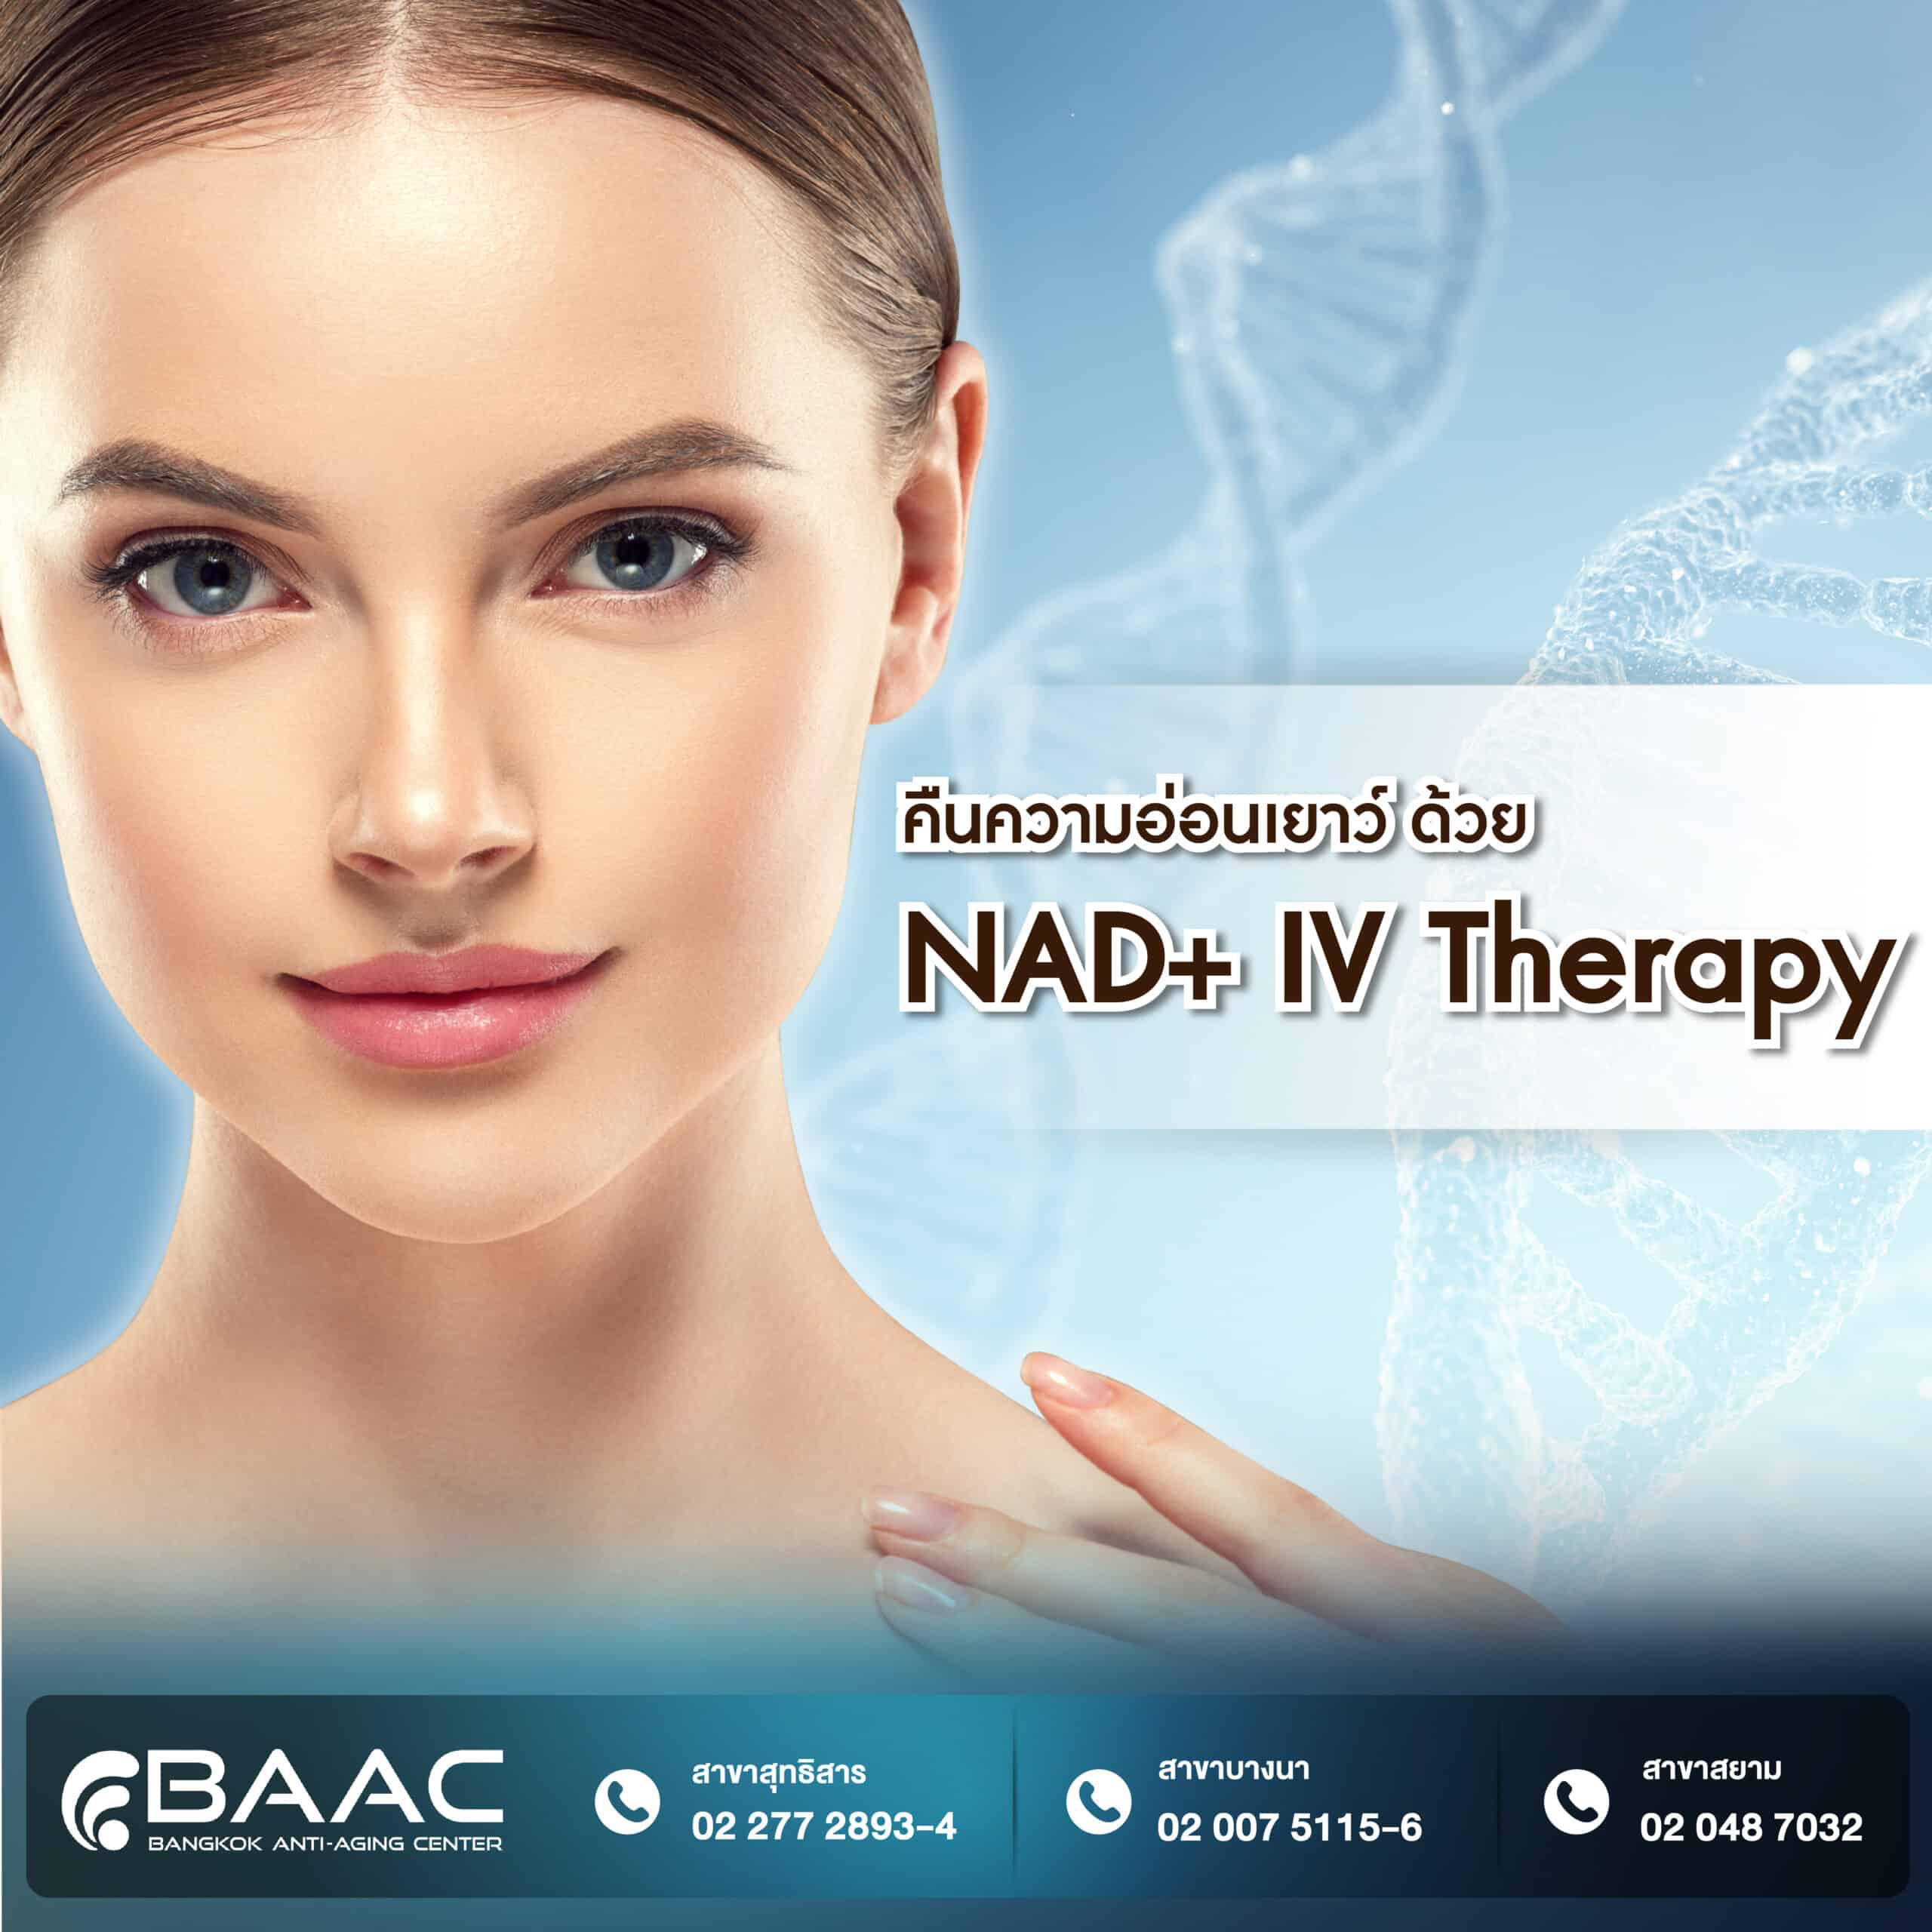 NAD + IV Therapy